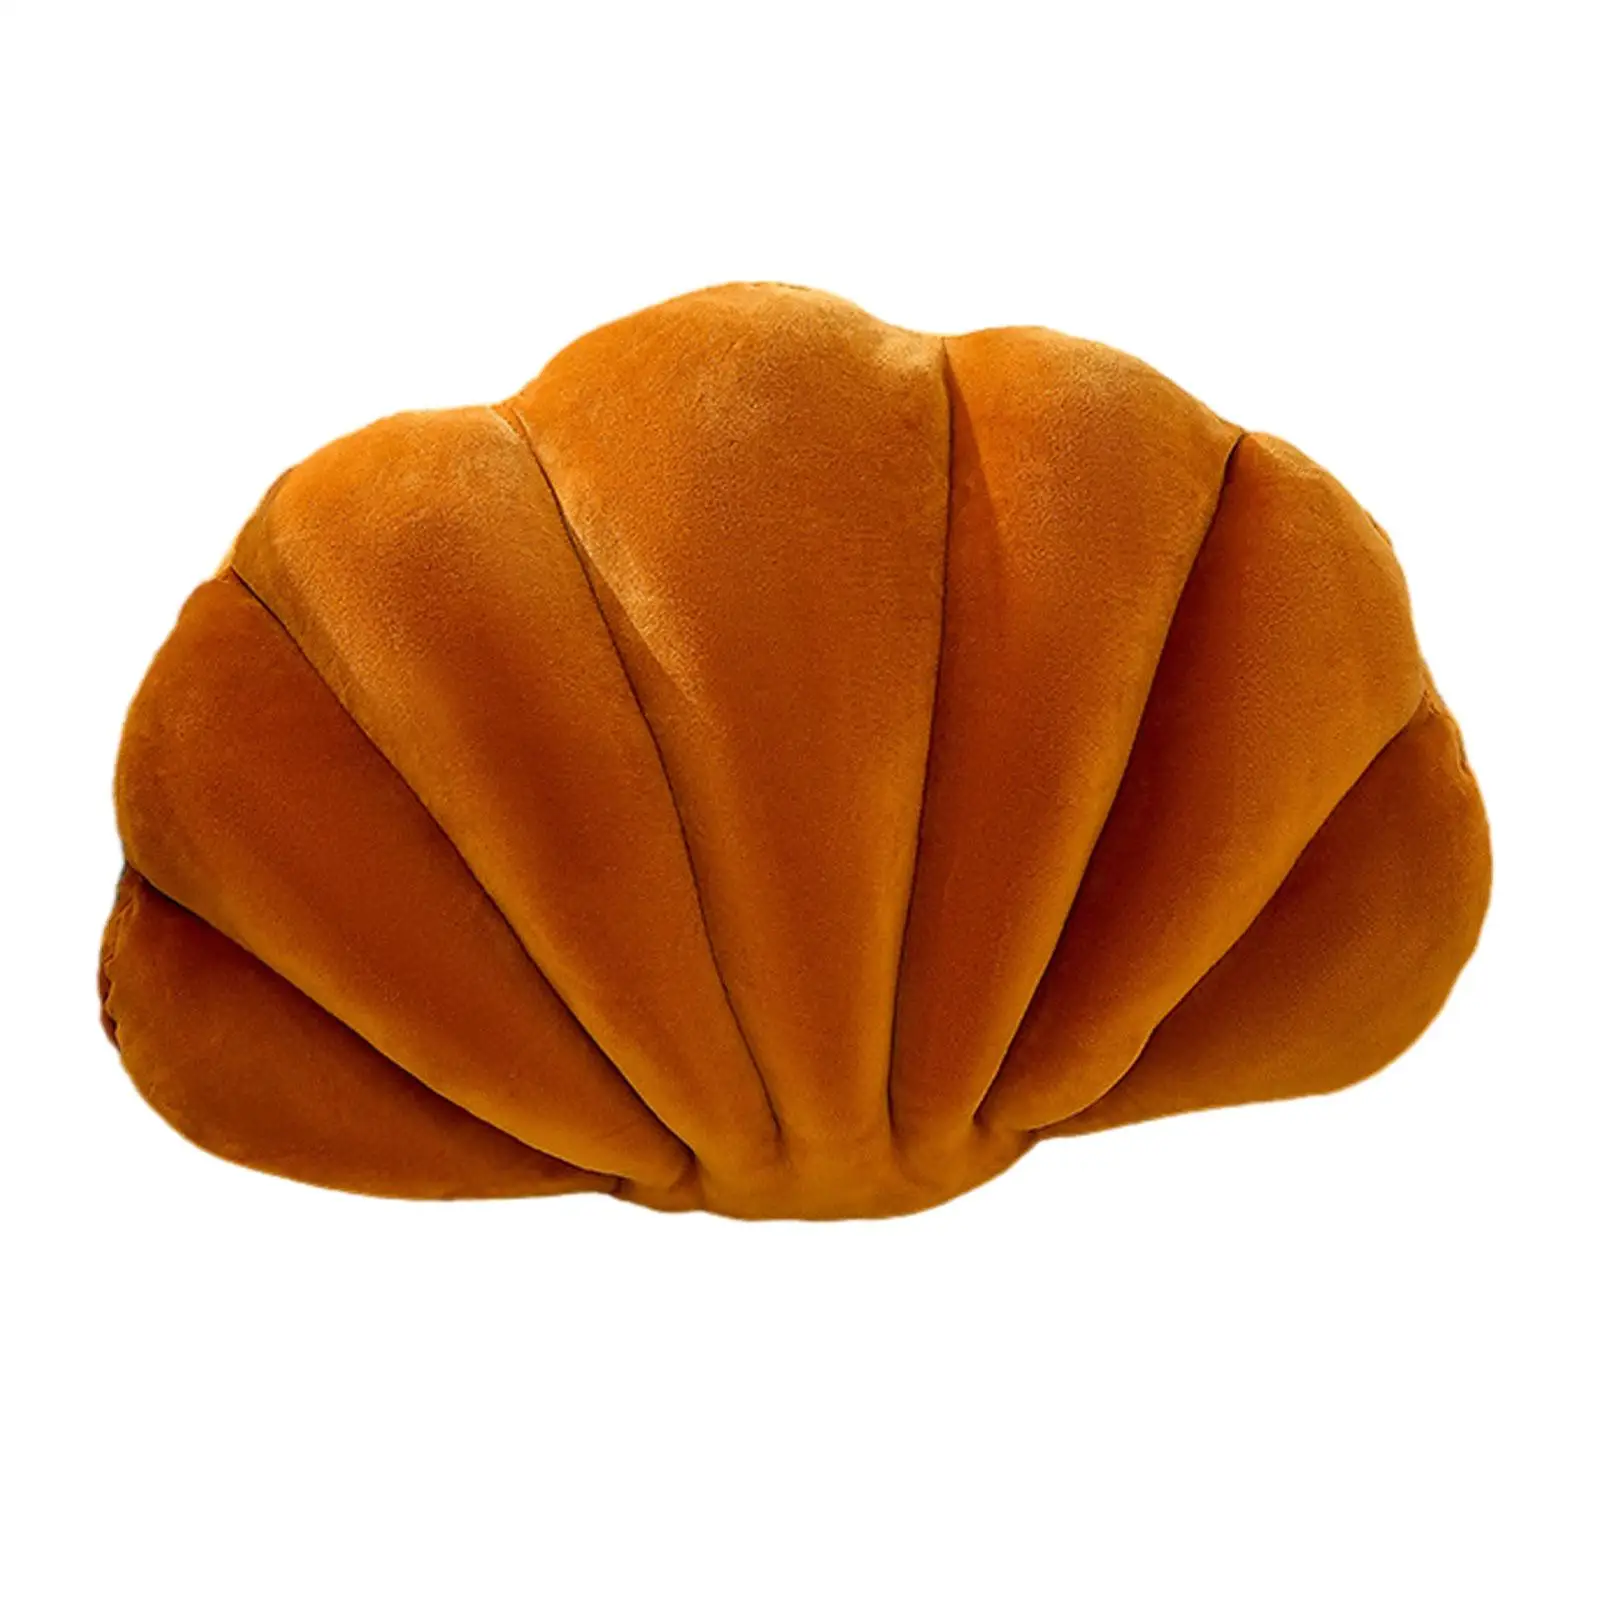 Shell Shaped Pillows Plush Pillow Ornament Multifunctional Cute Soft Floor Cushion for Office Couch Bedroom Bed Birthday Gifts